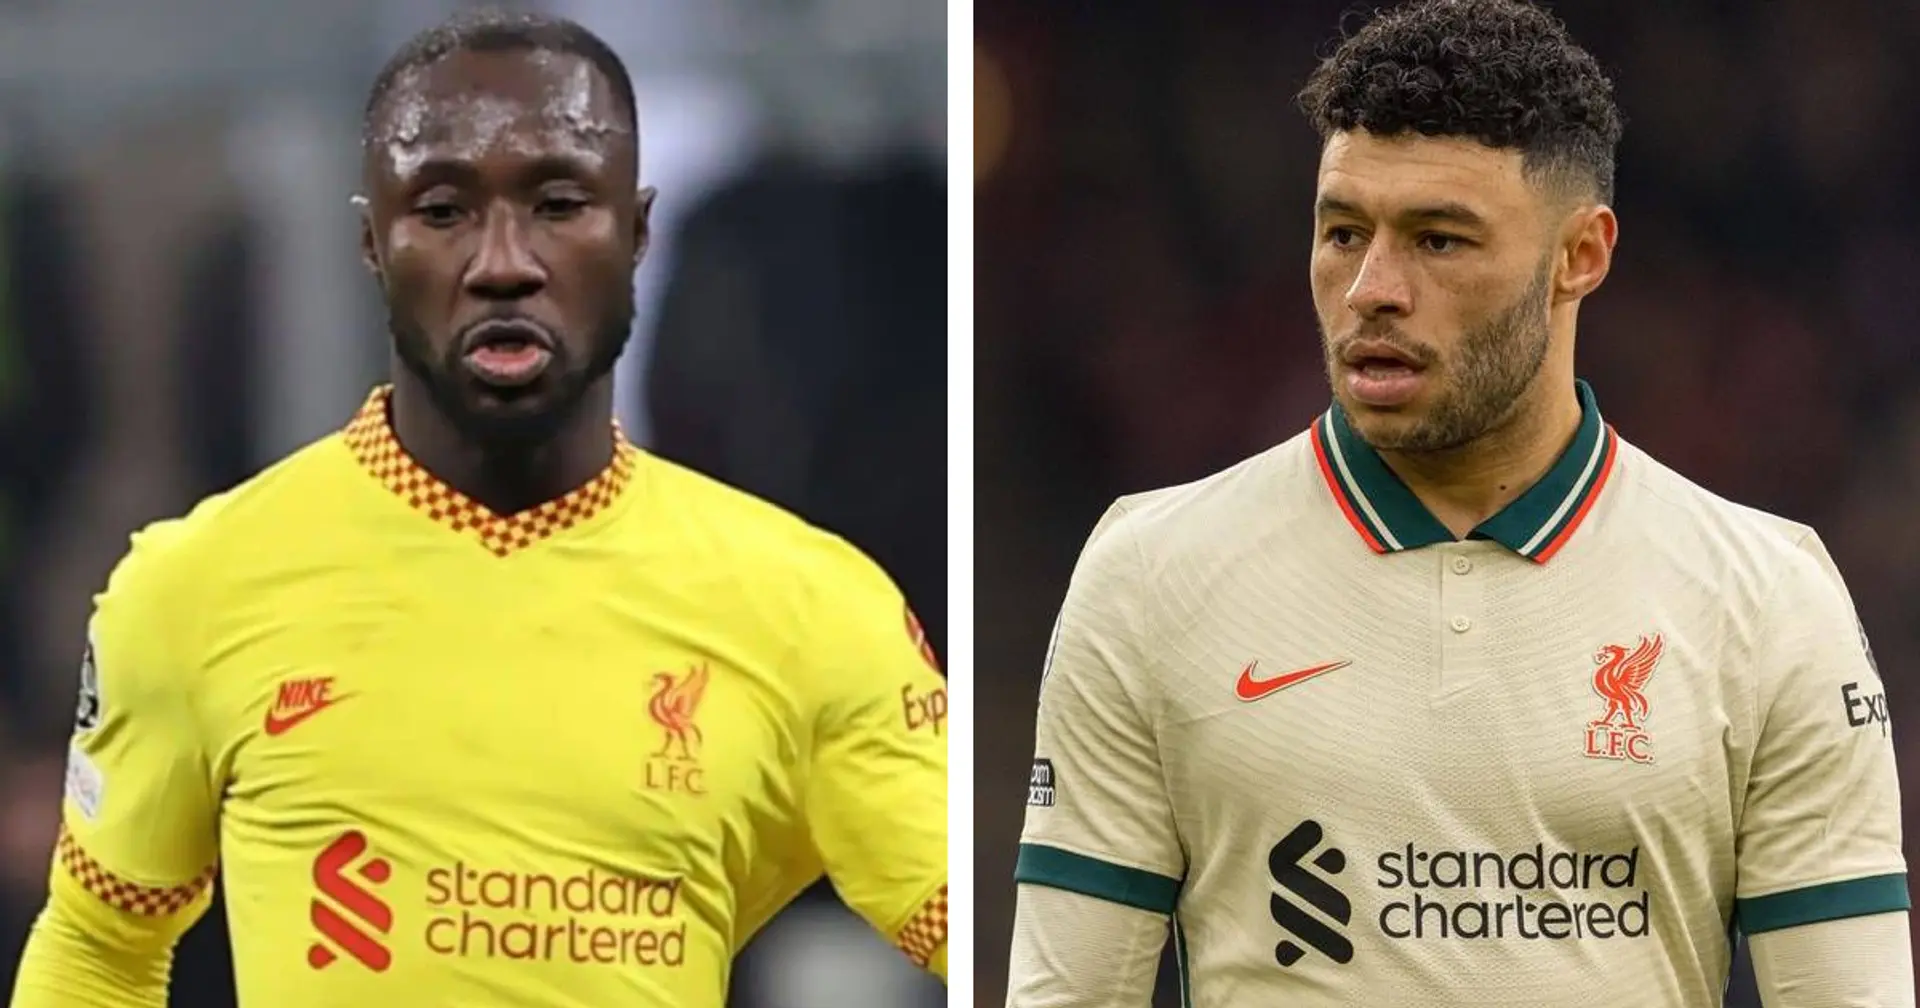 Keita and Oxlade-Chamberlain 'likely to leave' next summer - Paul Joyce (reliability: 5 stars)